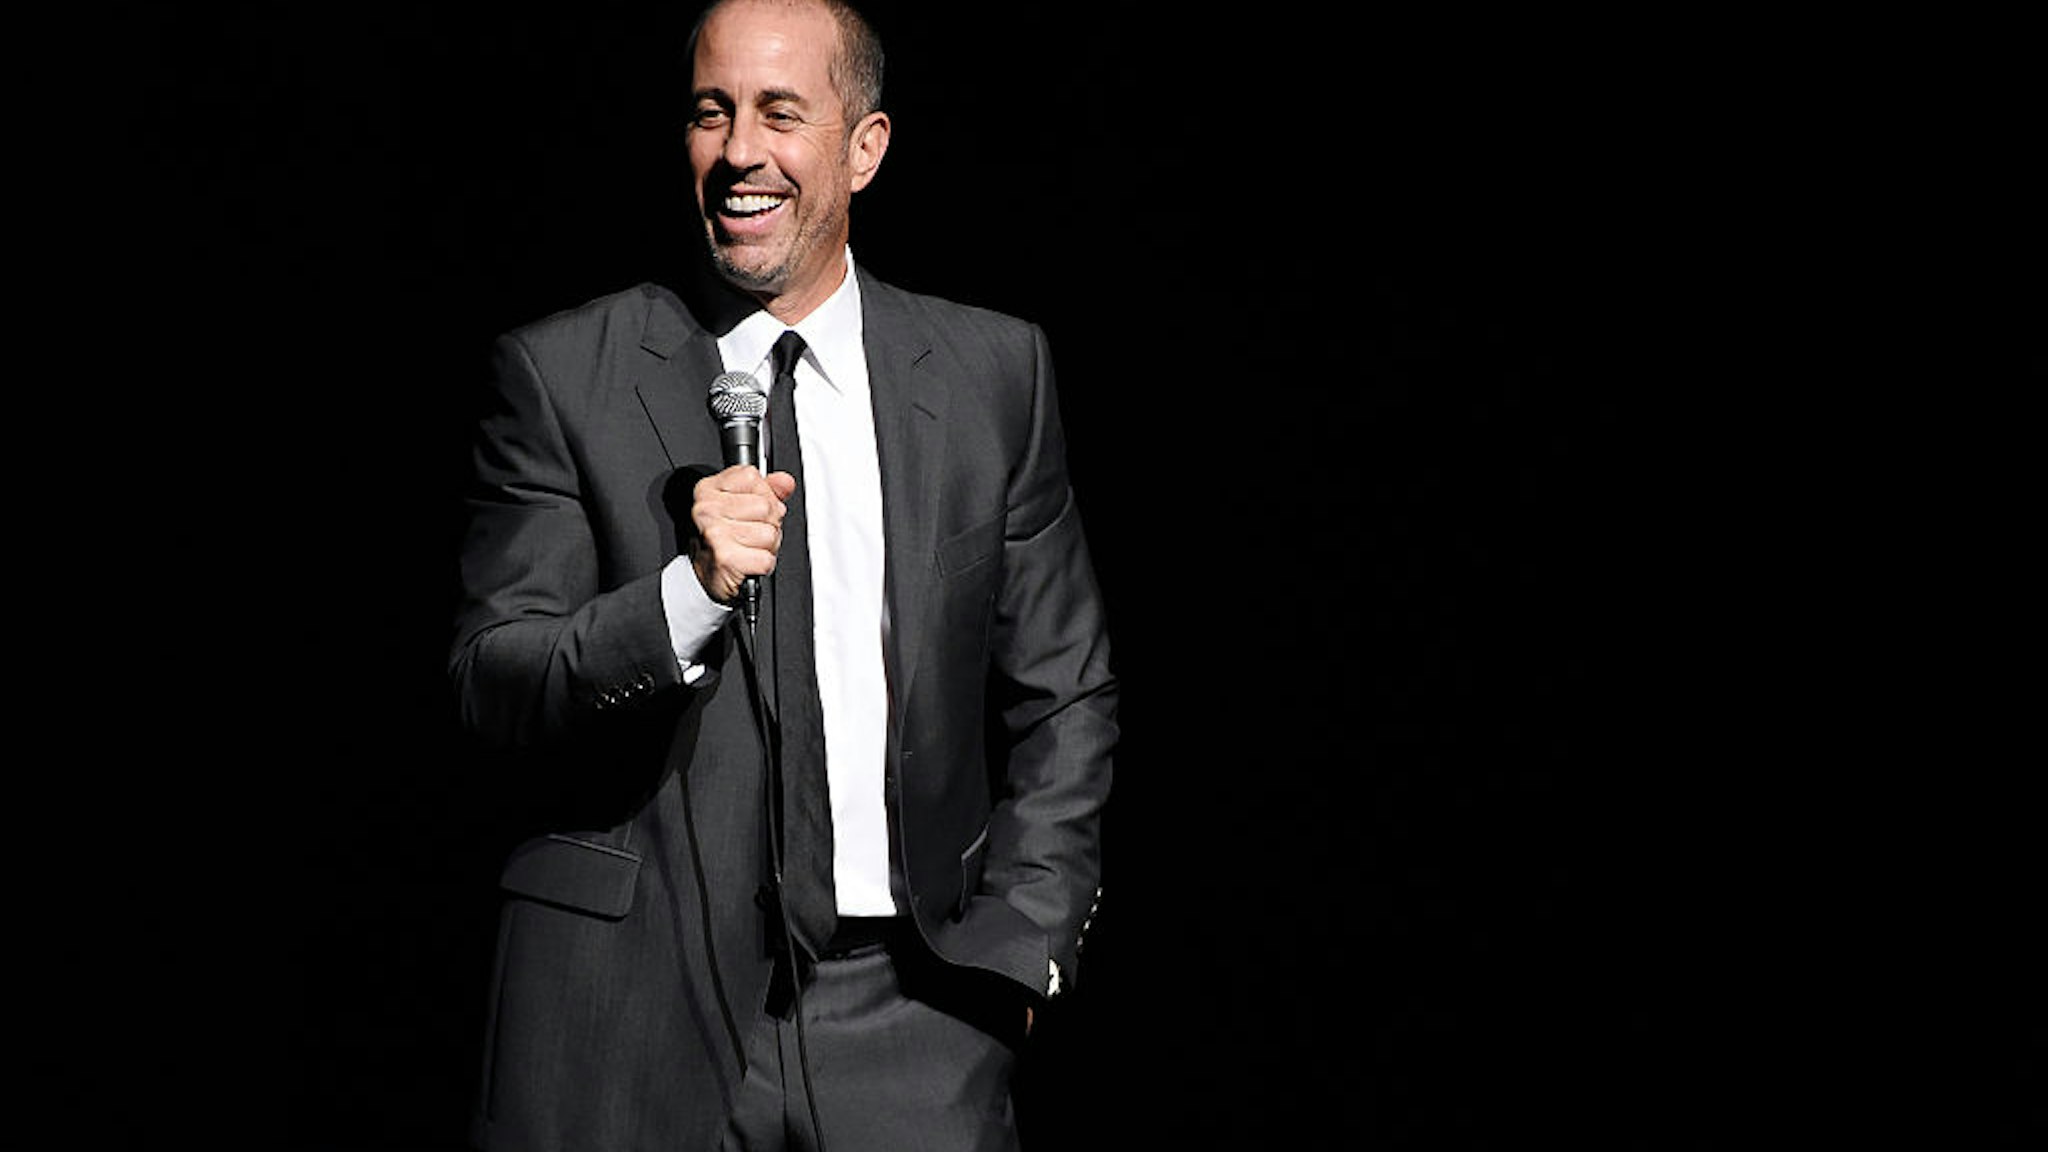 NEW YORK, NY - NOVEMBER 16: Comedian Jerry Seinfeld performs onstage as Baby Buggy celebrates 15 years with "An Evening with Jerry Seinfeld and Amy Schumer" presented by Bank of America - Inside at Beacon Theatre on November 16, 2015 in New York City. (Photo by Kevin Mazur/Getty Images for Baby Buggy)